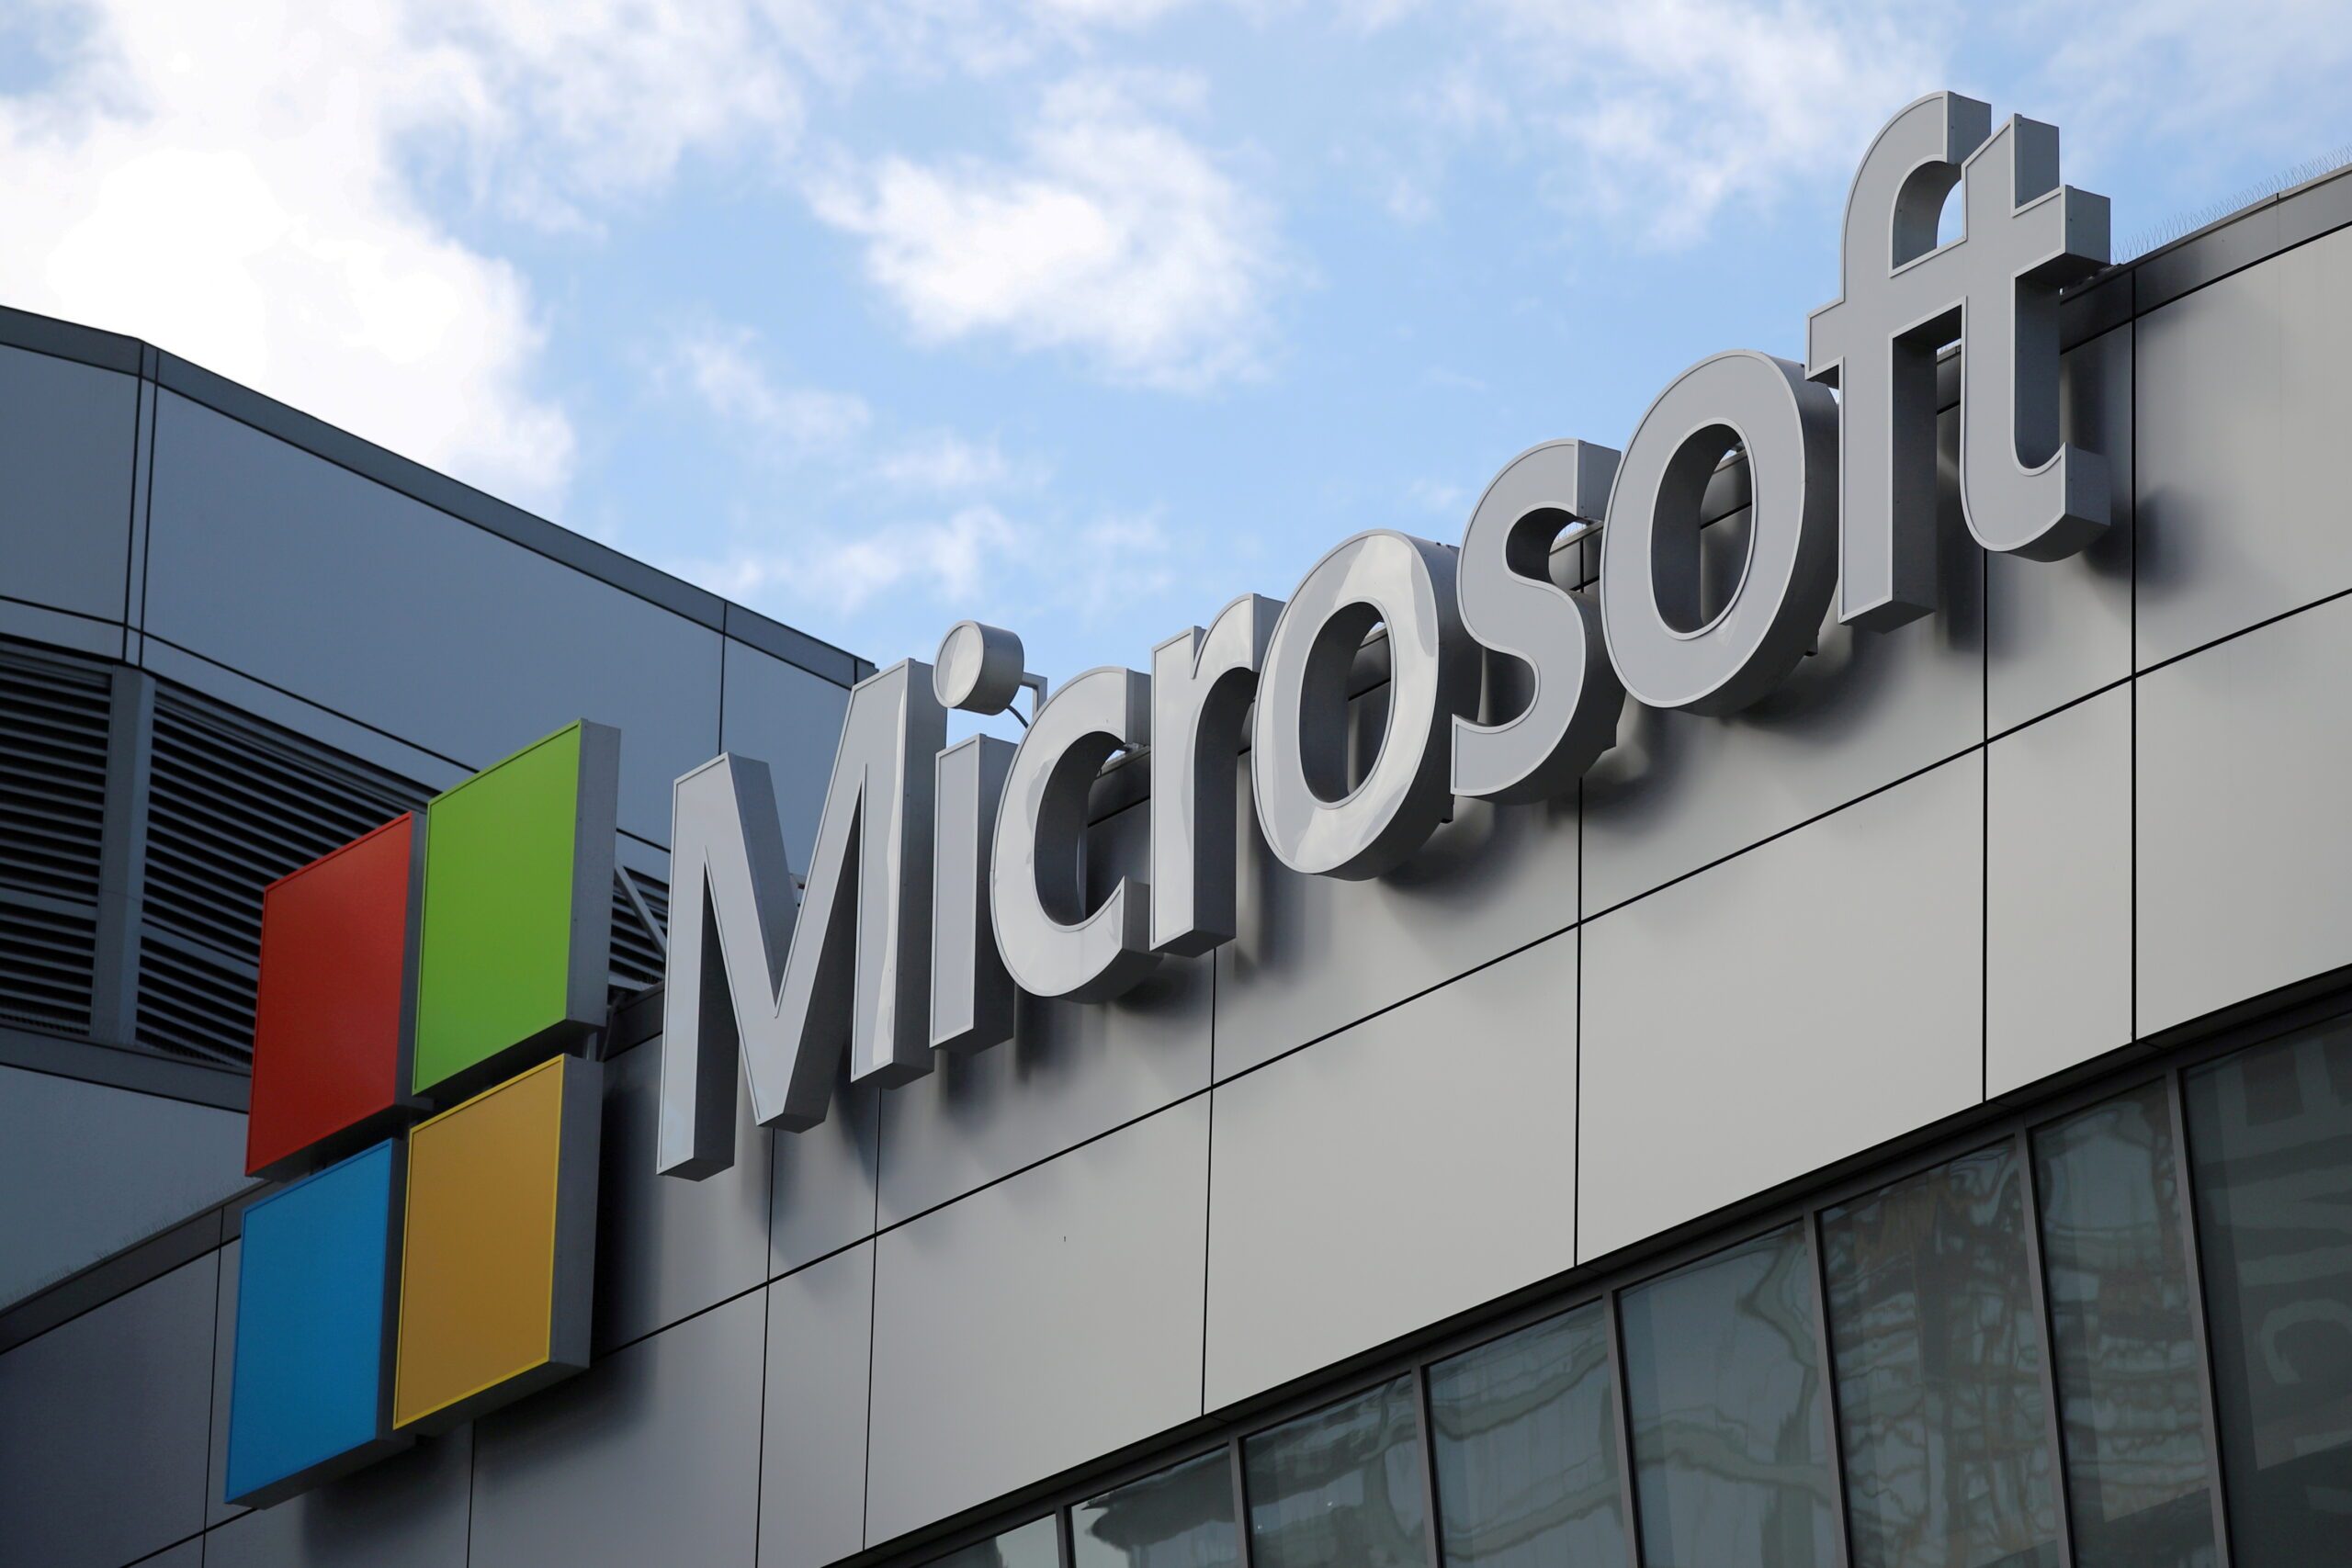 Malware observed in systems belonging to several Ukraine gov’t agencies – Microsoft